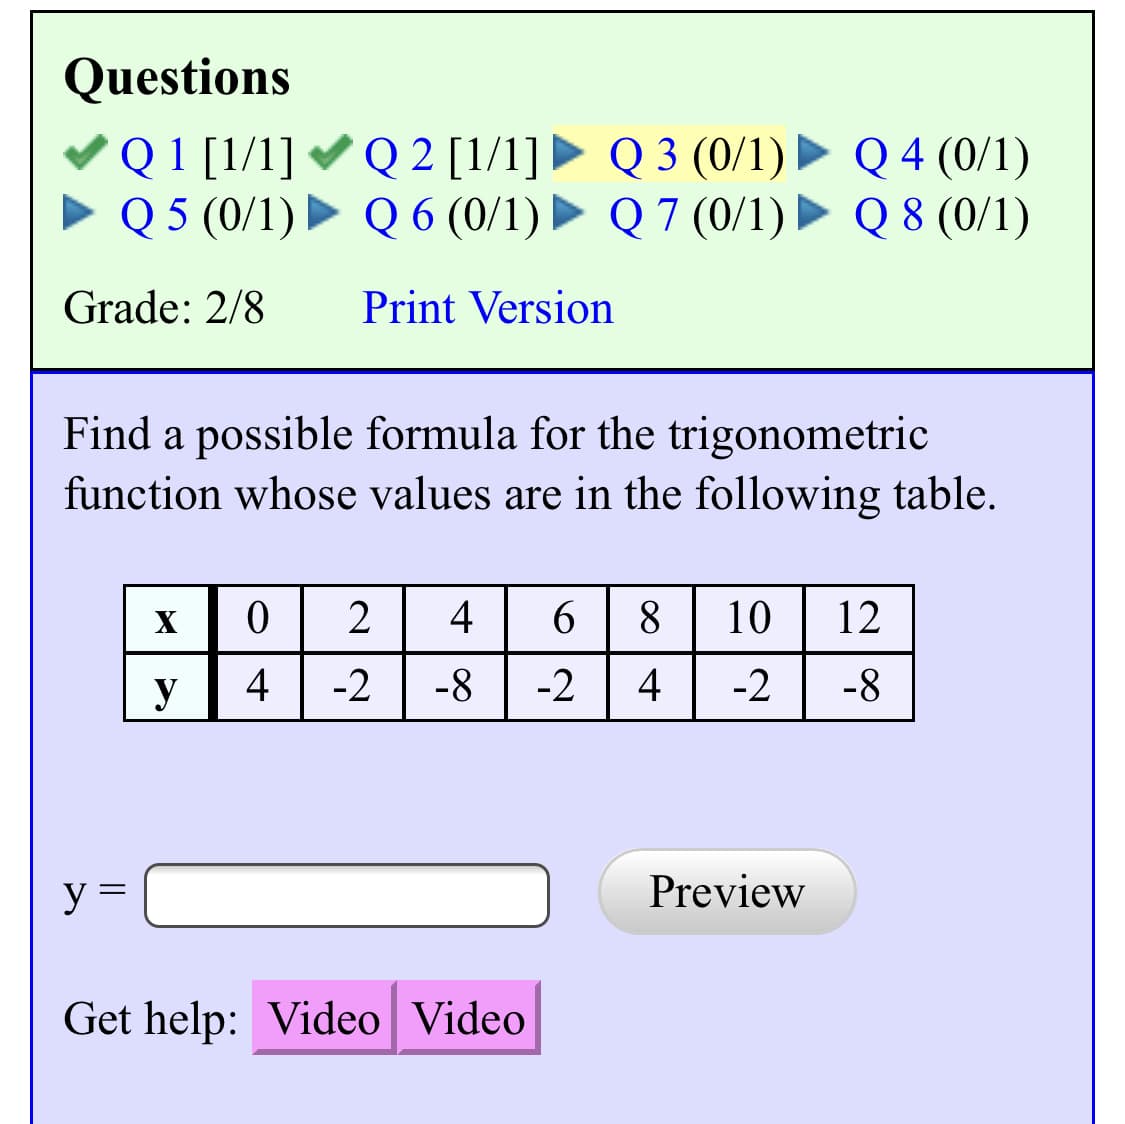 Questions
Grade: 2/8
Print Version
Find a possible formula for the trigonometric
function whose values are in the following table.
x 0246810 12
Preview
y-
Get help: Video Video
